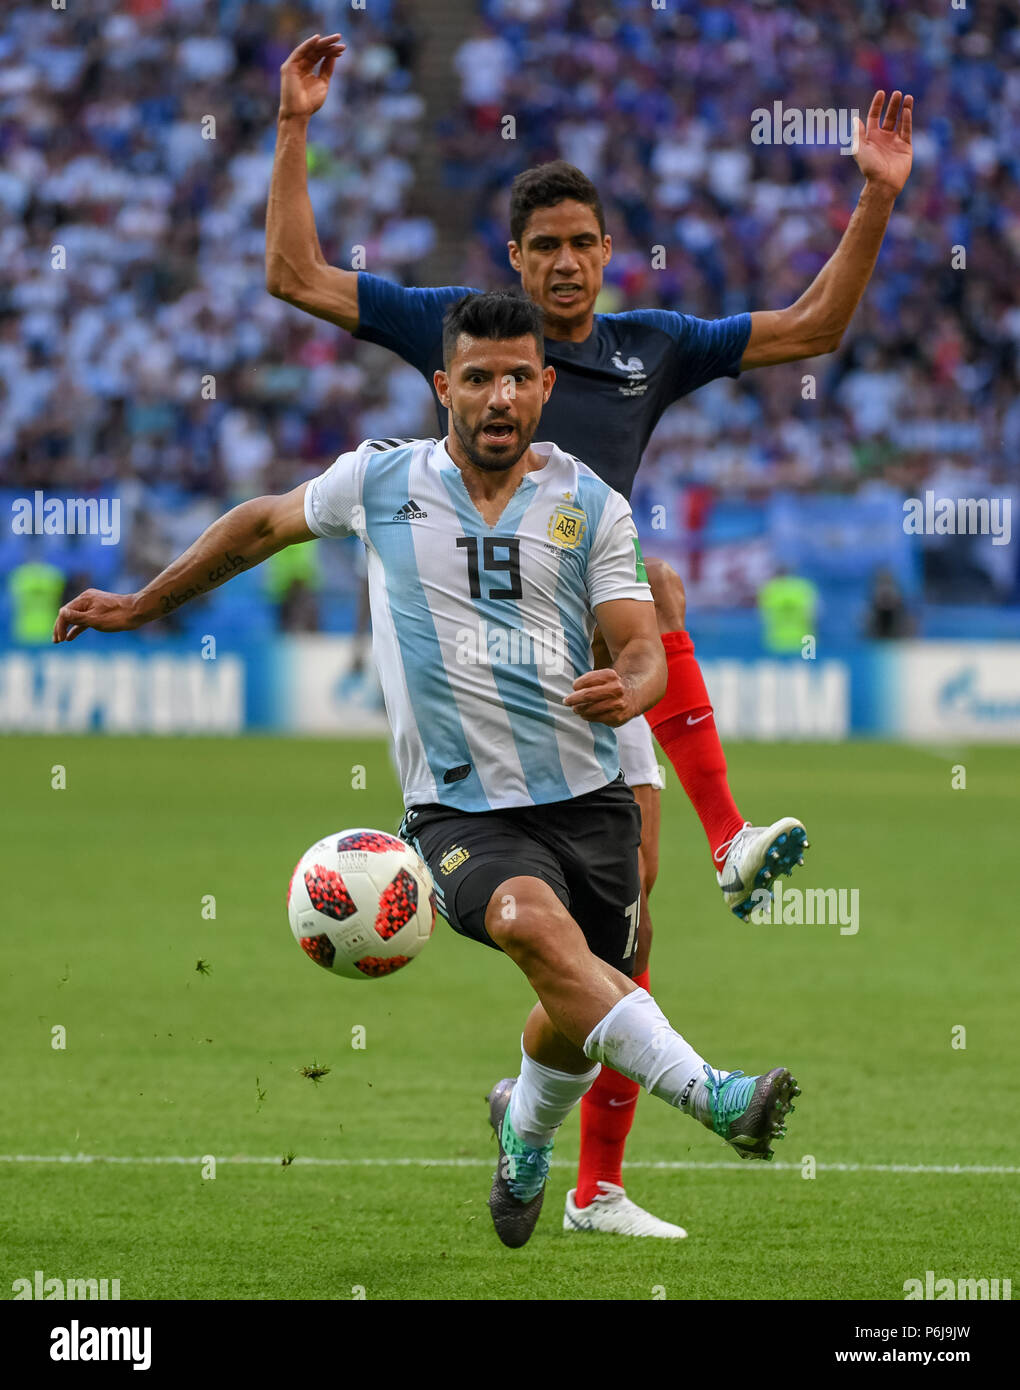 Kazan Arena, Kazan, Russia. 30th June, 2018. FIFA World Cup Football, Round of 16, France versus Argentina; Raphael Varane of France and Sergio Aguero of Argentina challenge for the ball Credit: Action Plus Sports/Alamy Live News Stock Photo